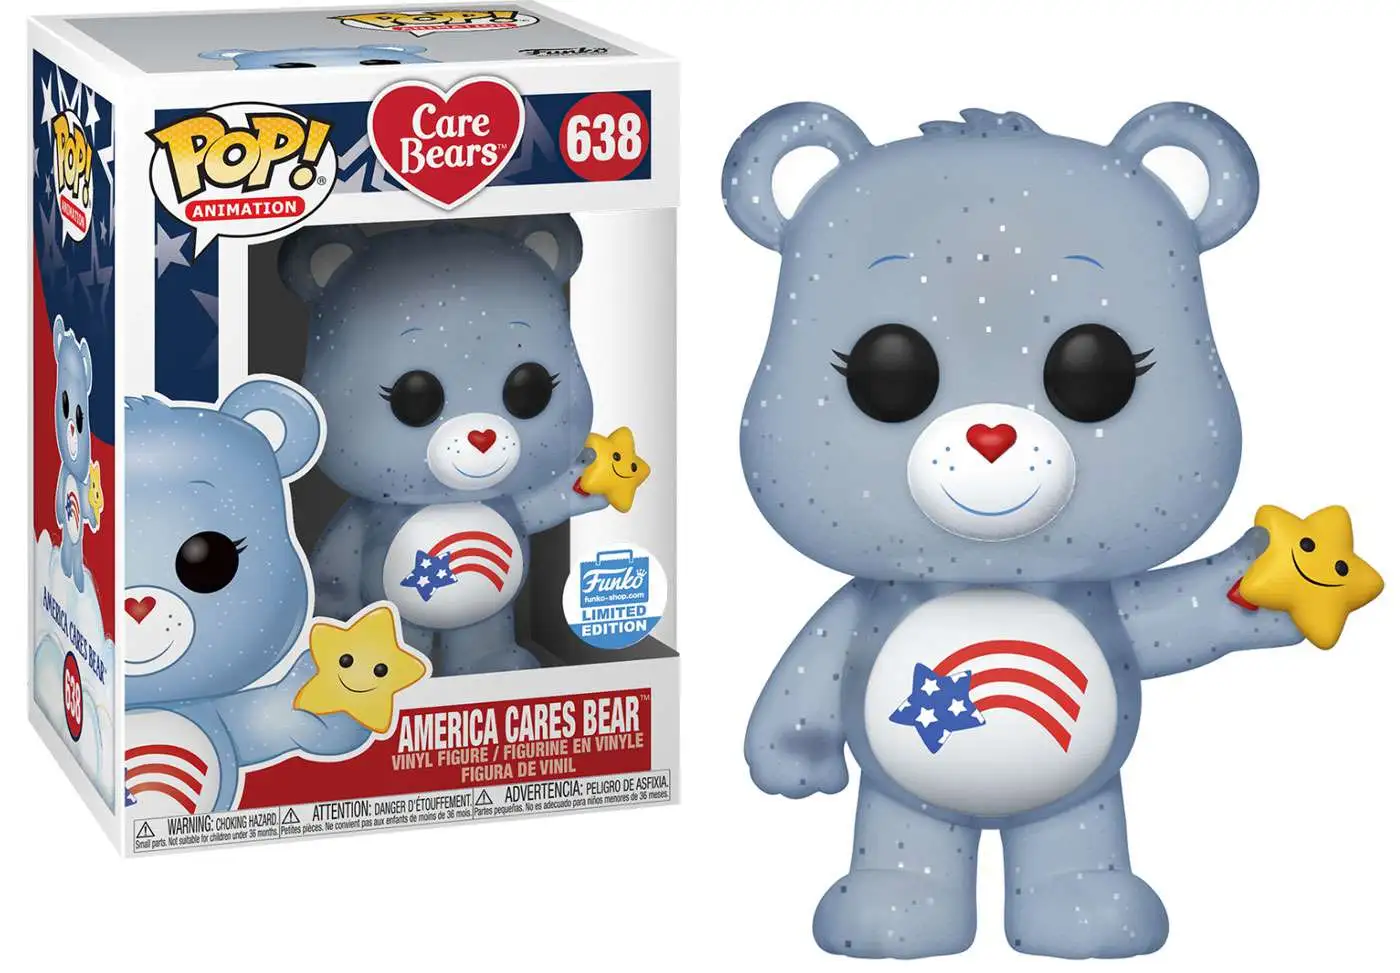 Pop Animation Care Bears 355 Good Luck Bear Chase Funko Figure 66956 for sale online 